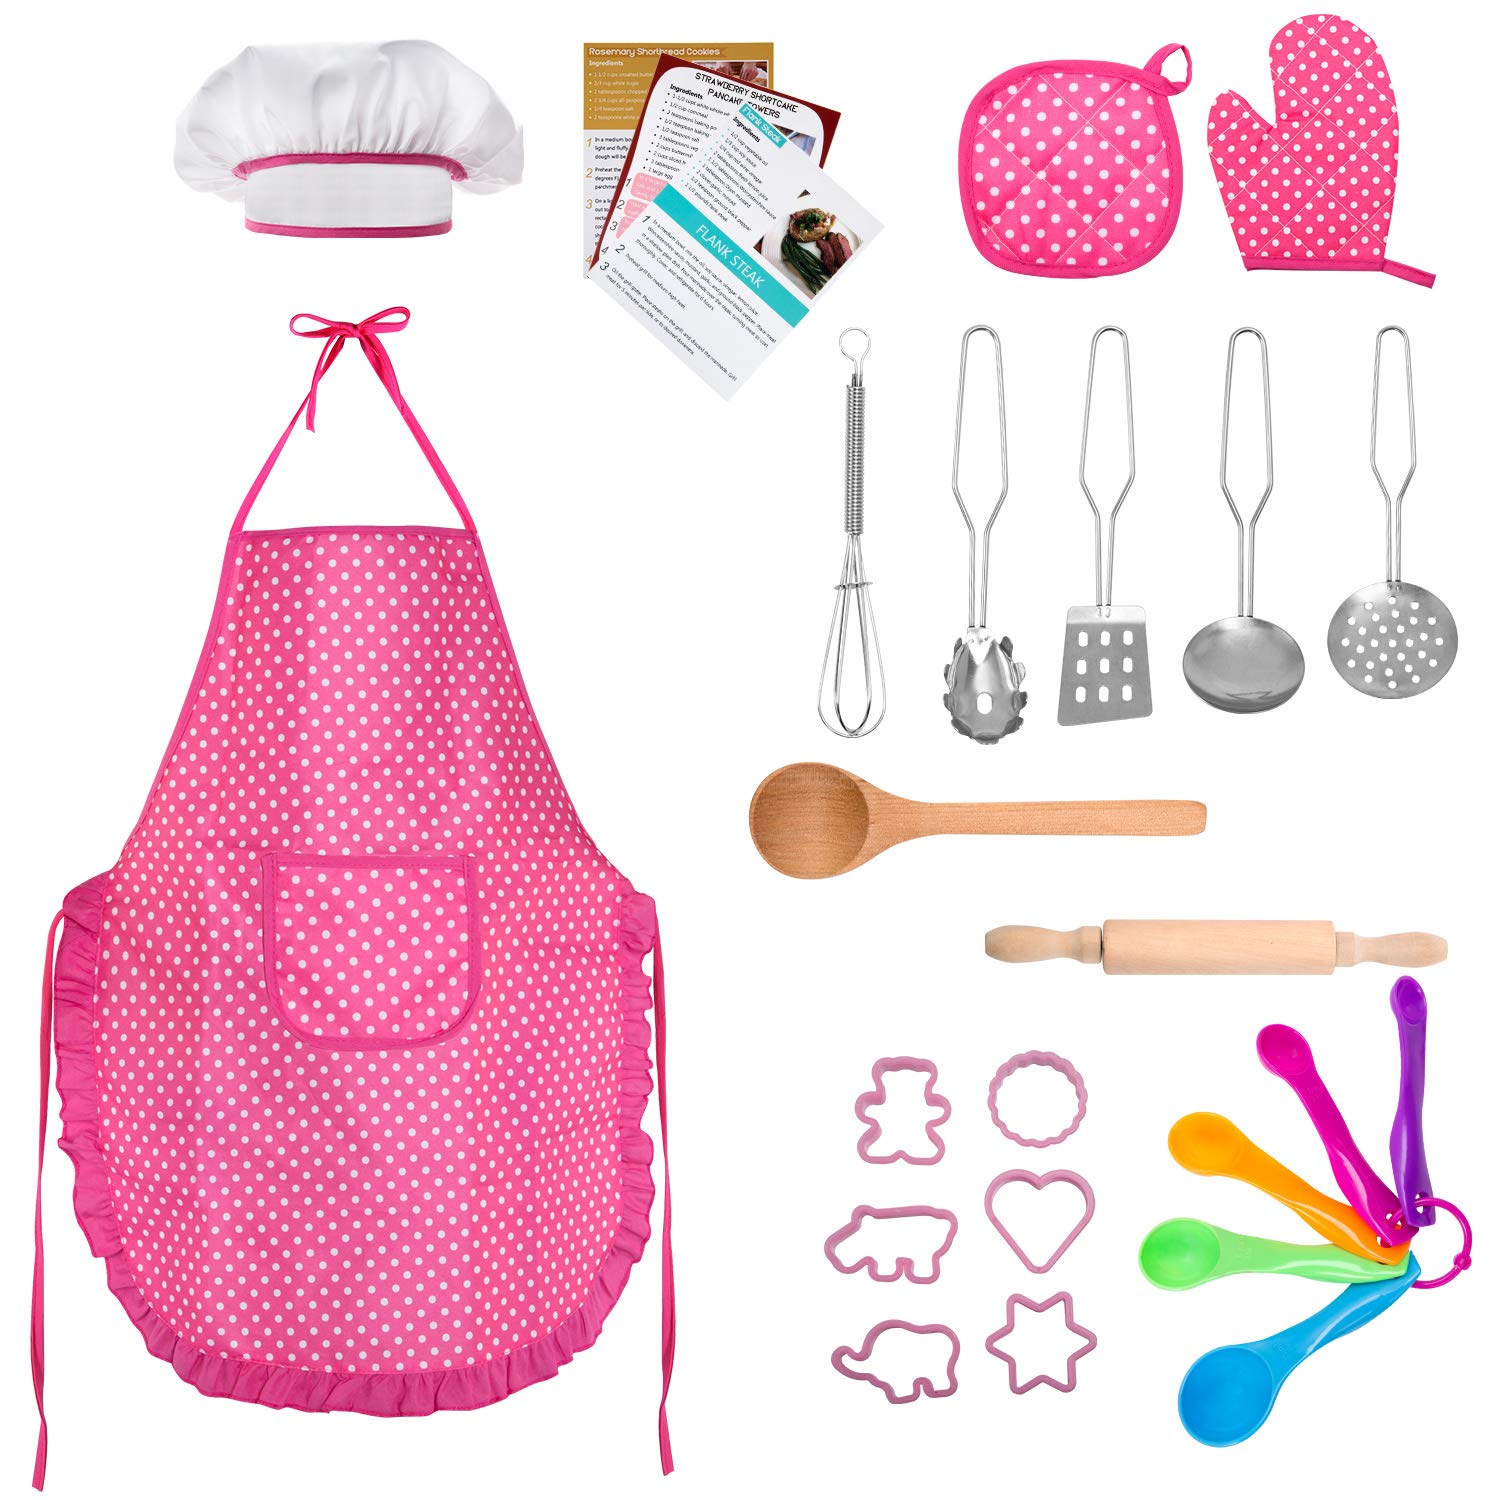 Book Cover Tepsmigo Kids Chef Role Play Costume Set 22 PCS, Toddler Cooking and Baking Set with Apron, Chef Hat, Recipe Cards, Cooking Mitt, Utensils for Boys and Girls Ages 3+